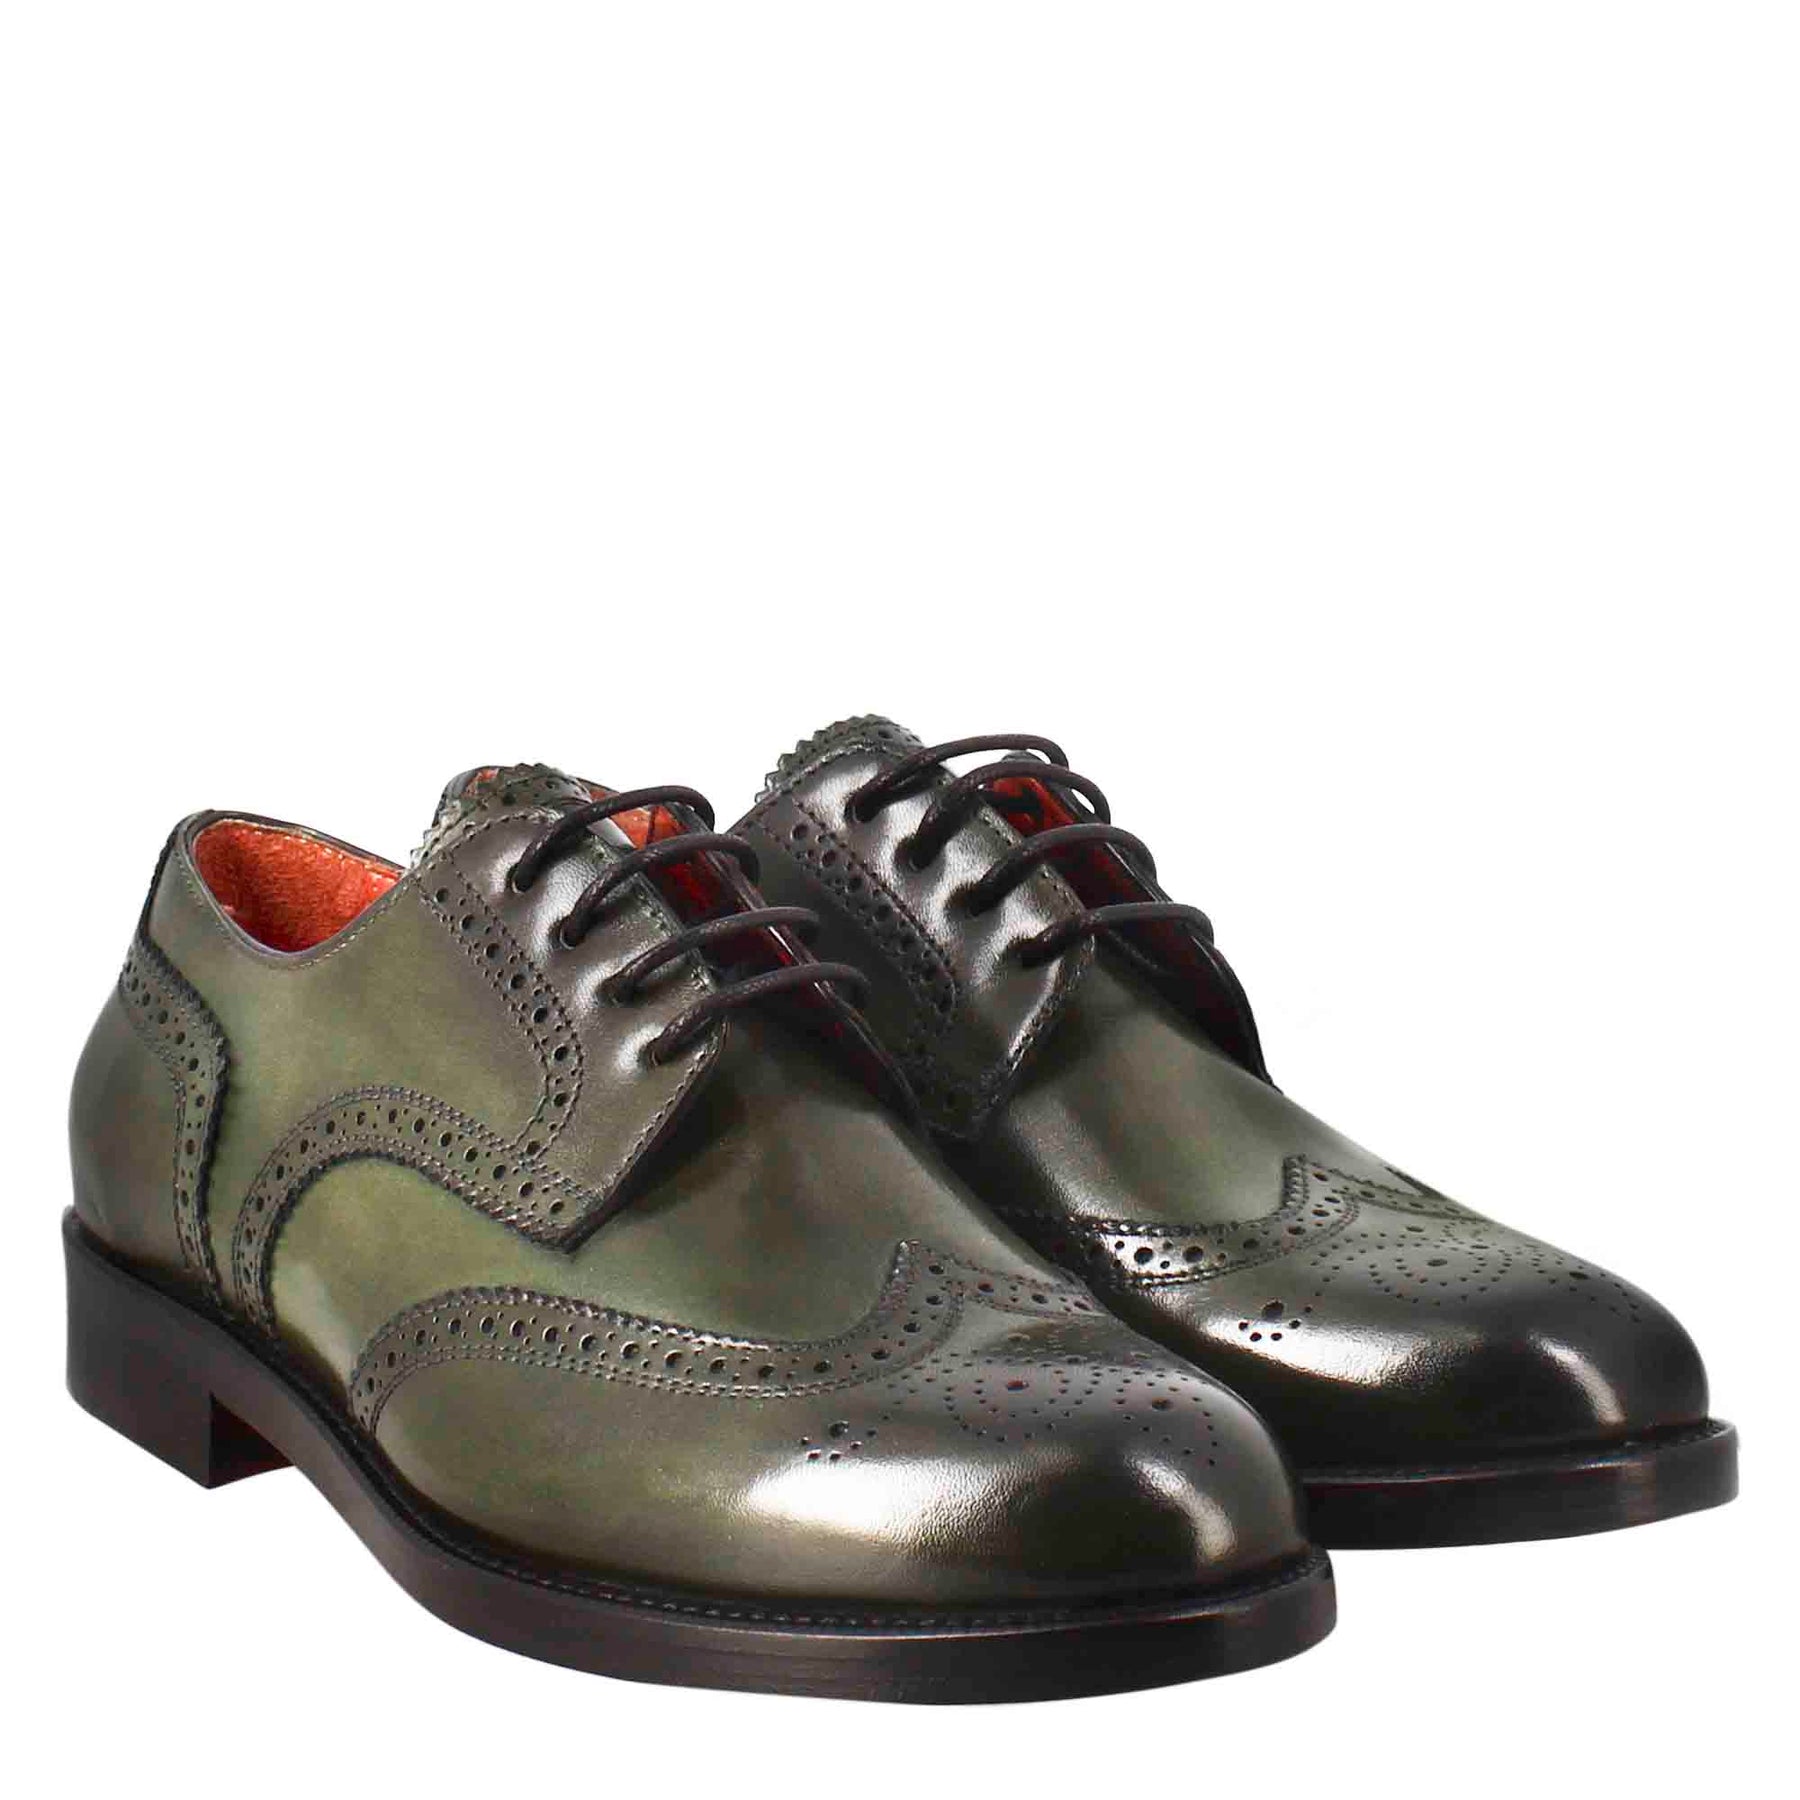 Women's derby with brogue effect in dark green leather